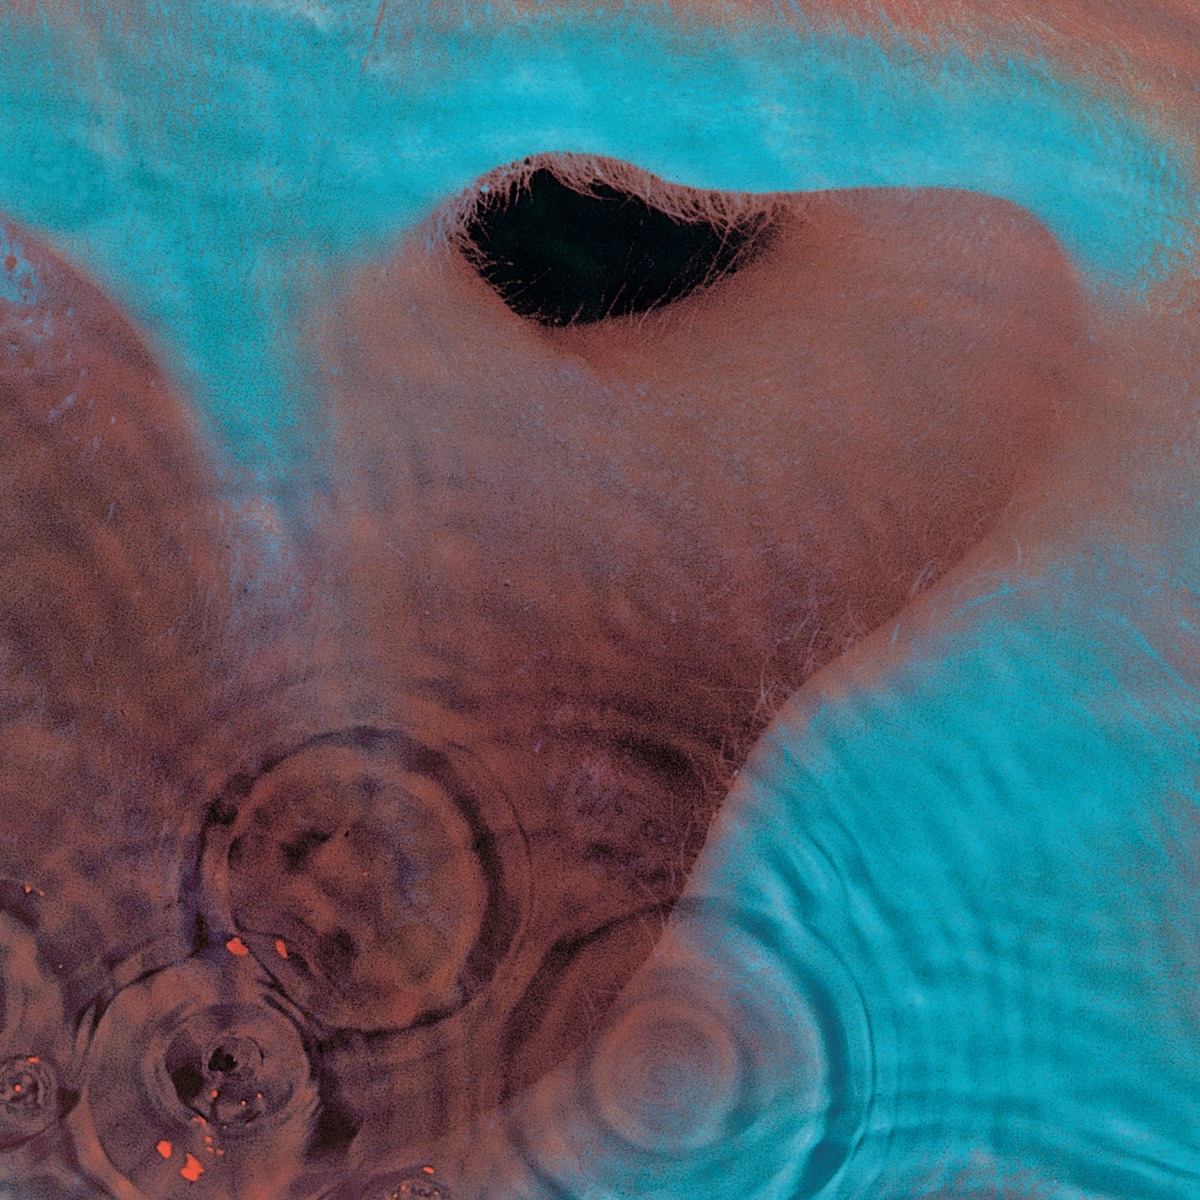 Meddle Album Cover by Pink Floyd